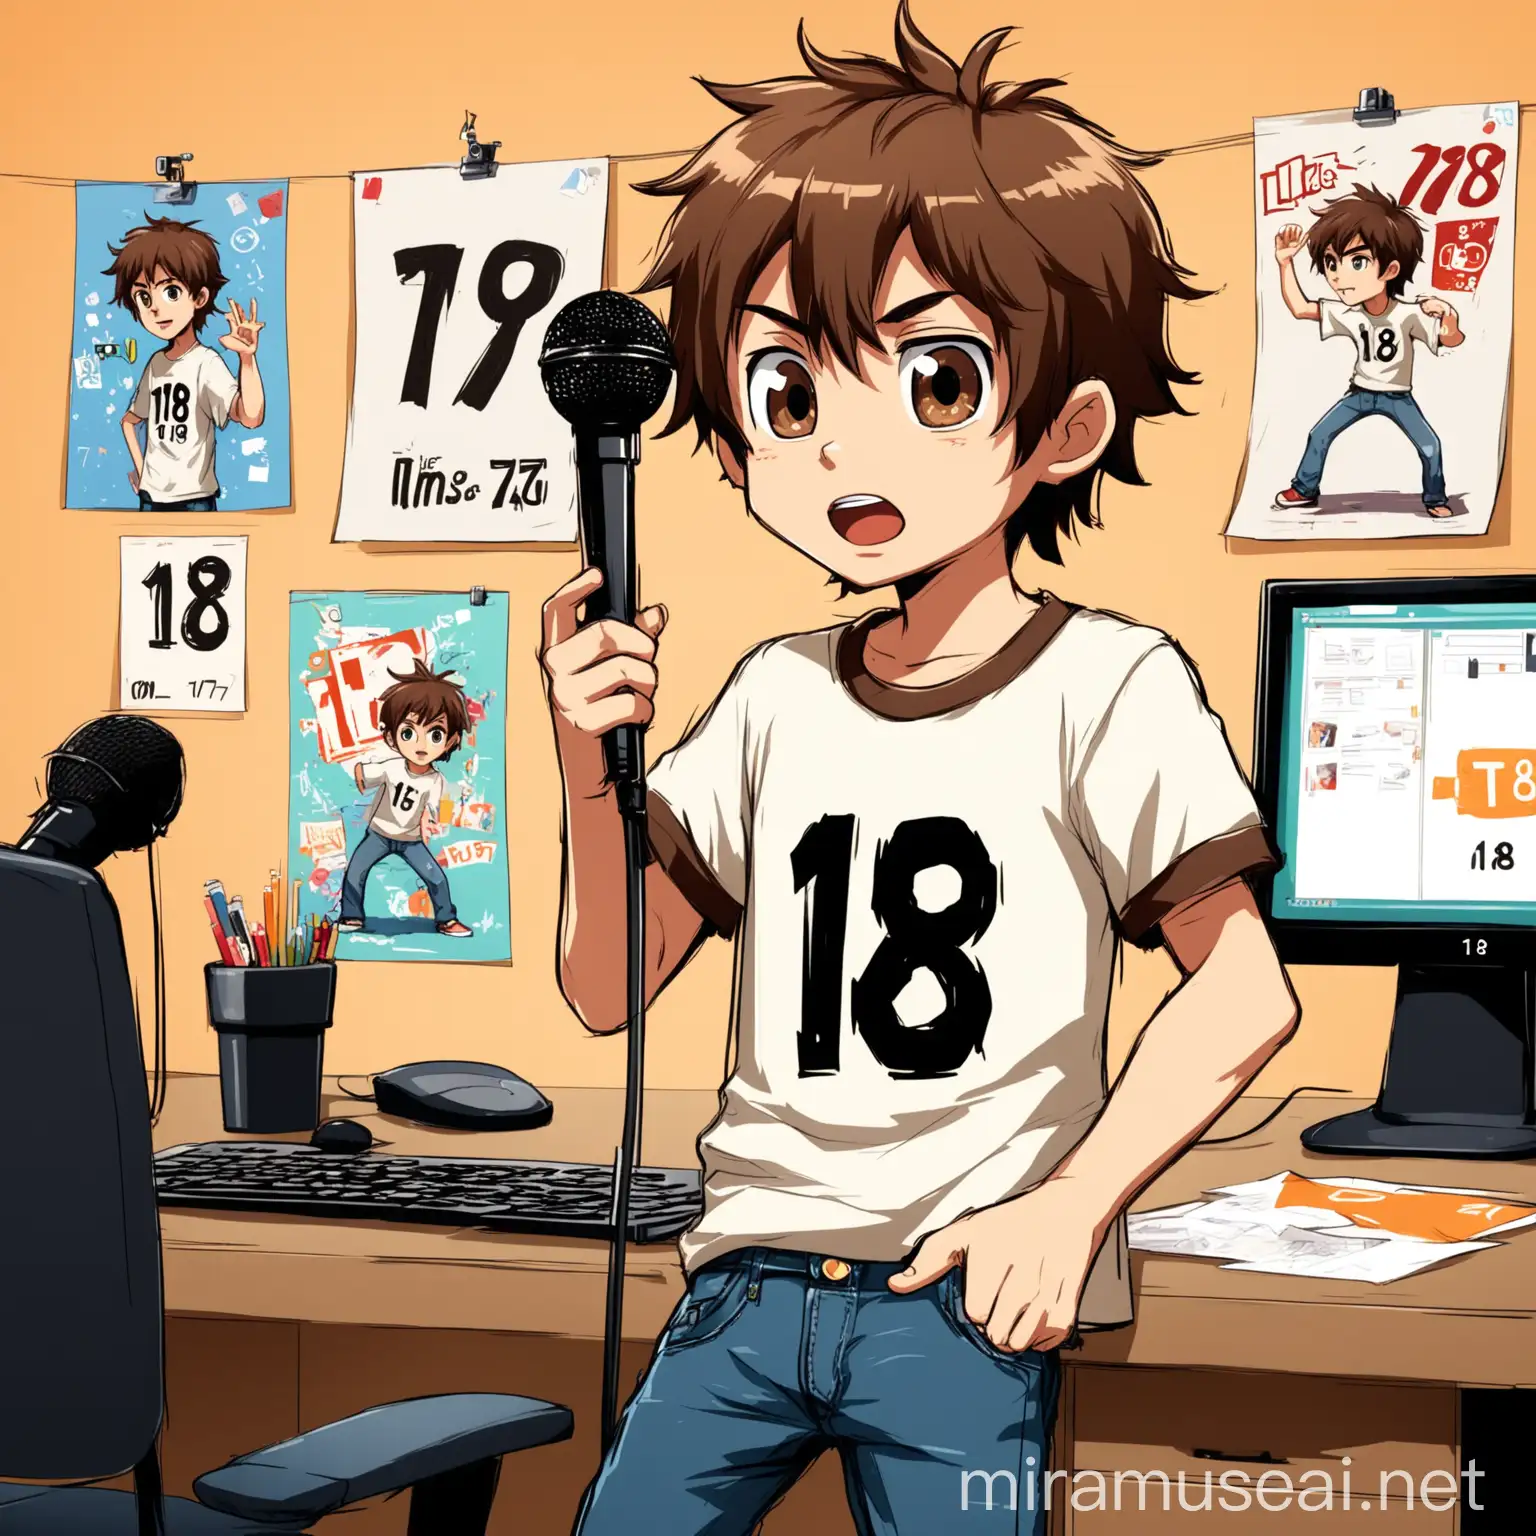 Animated Teenage Boy Speaking into Microphone at Desk with Computer and Posters